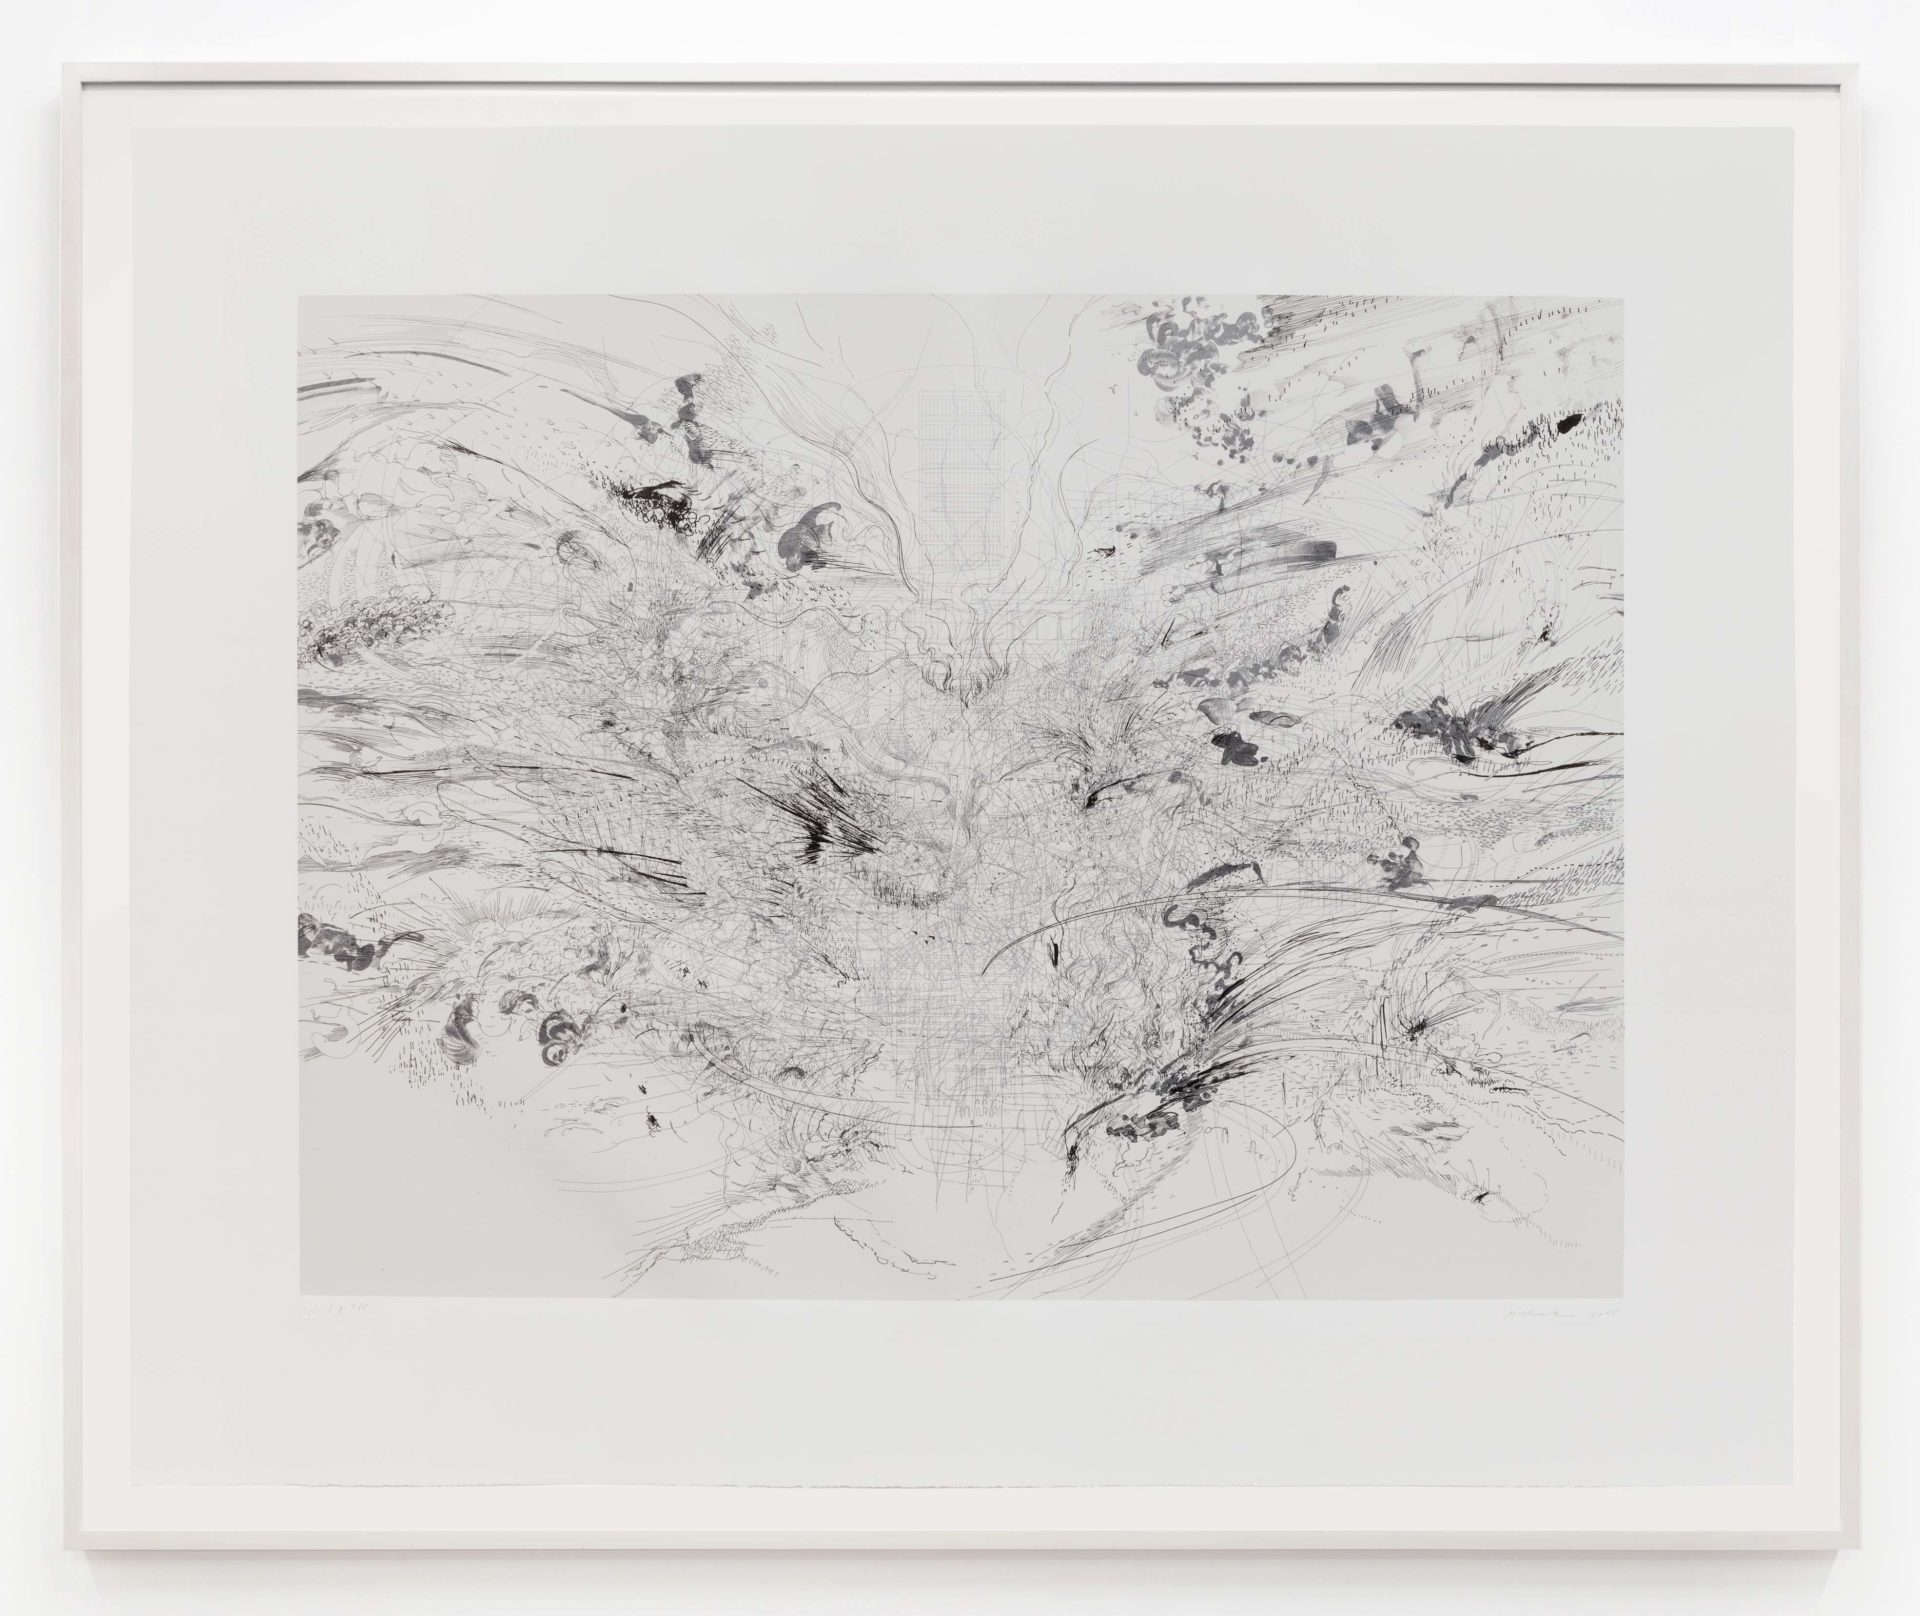 Julie Mehretu Entropia (construction), 2005 Lithograph, on Gampi chine collé to Somerset paper, with full margins Image Dimensions: 29 1/3 x 39 3/4 inches (74.5 x 101 cm) Paper Dimensions: 40 x 49 3/4 inches (101.6 x 126.4 cm) Framed Dimensions: 44 1/4 x 54 inches (112.4 x 137.2 cm) PP 4, Edition of 30, plus 5